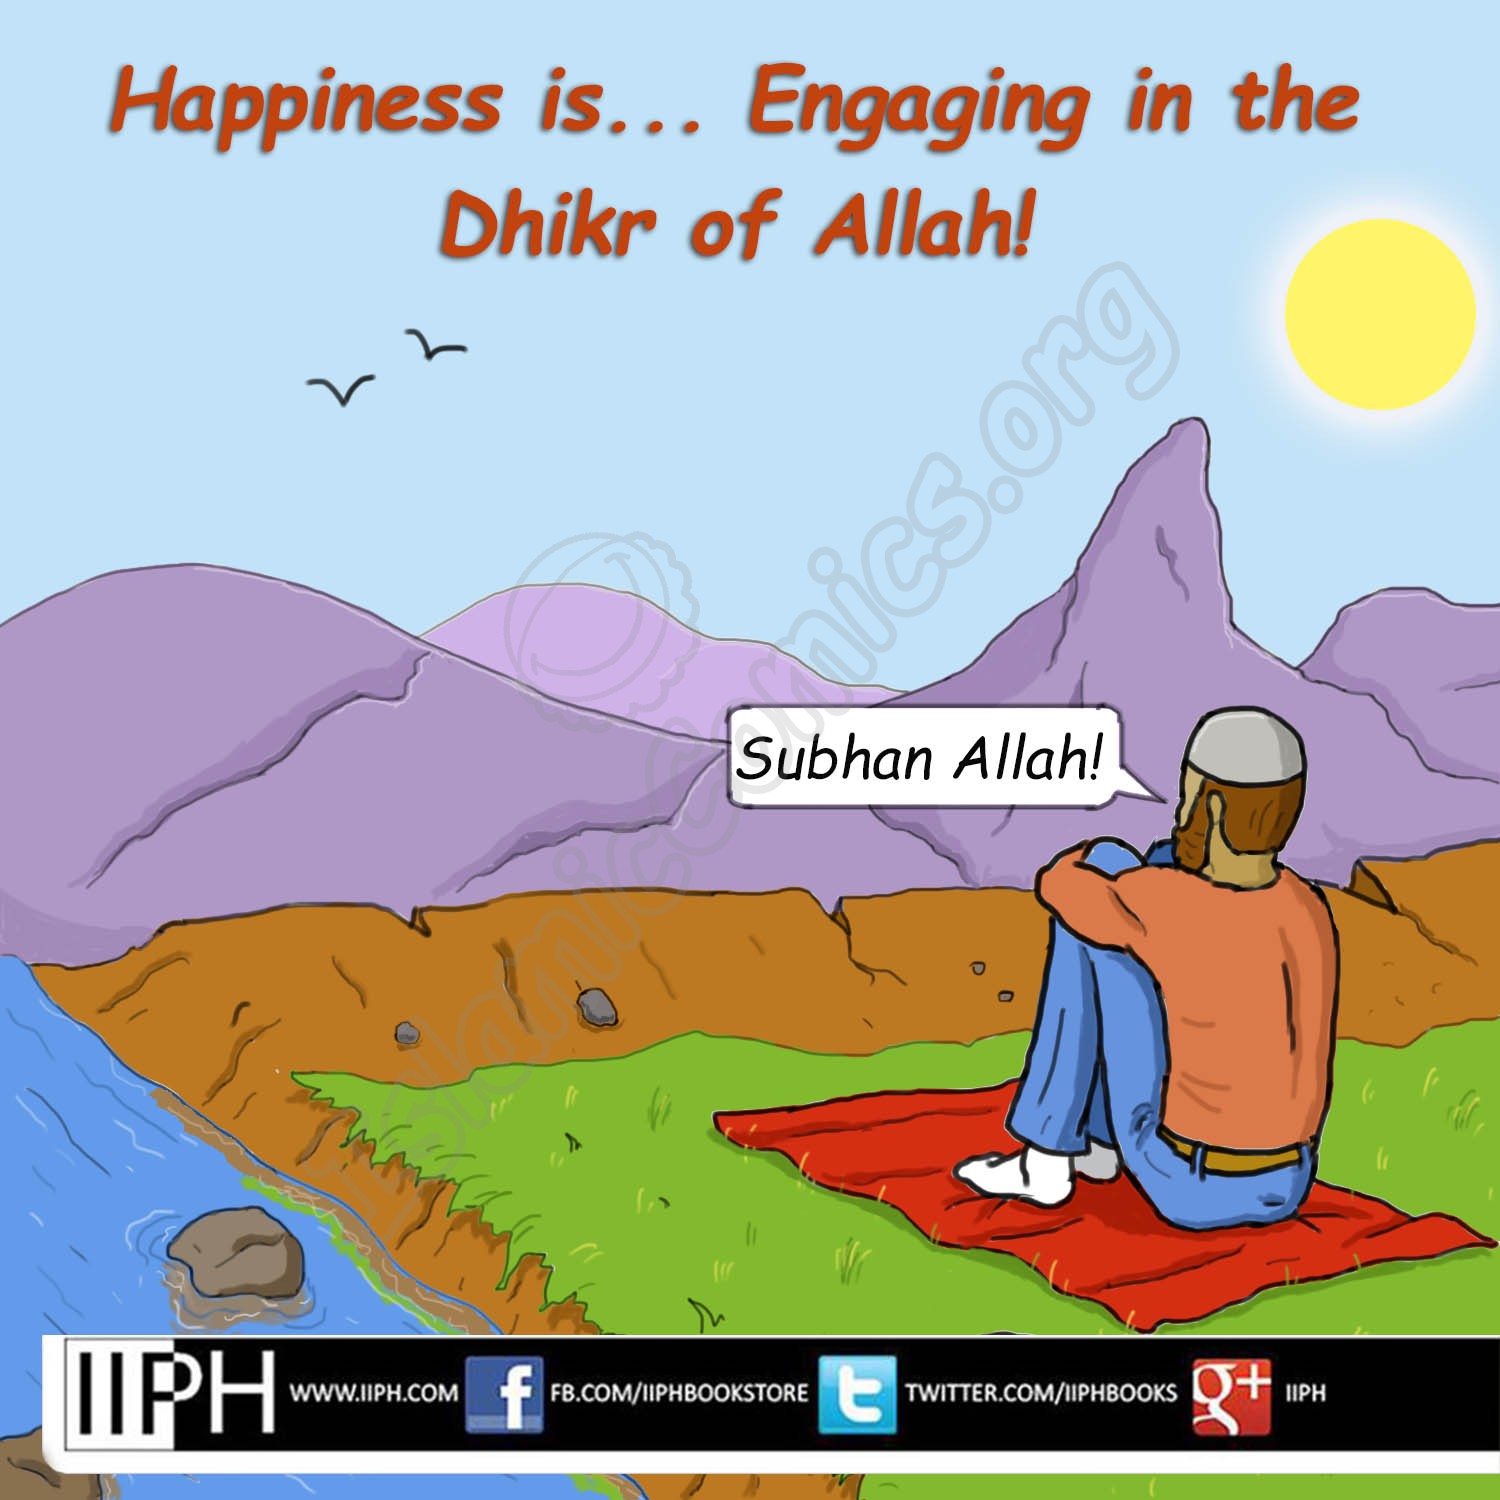 Happiness is Dhikr (Remembrance) of Allah - Islamic Illustrations (Islamic Comics)